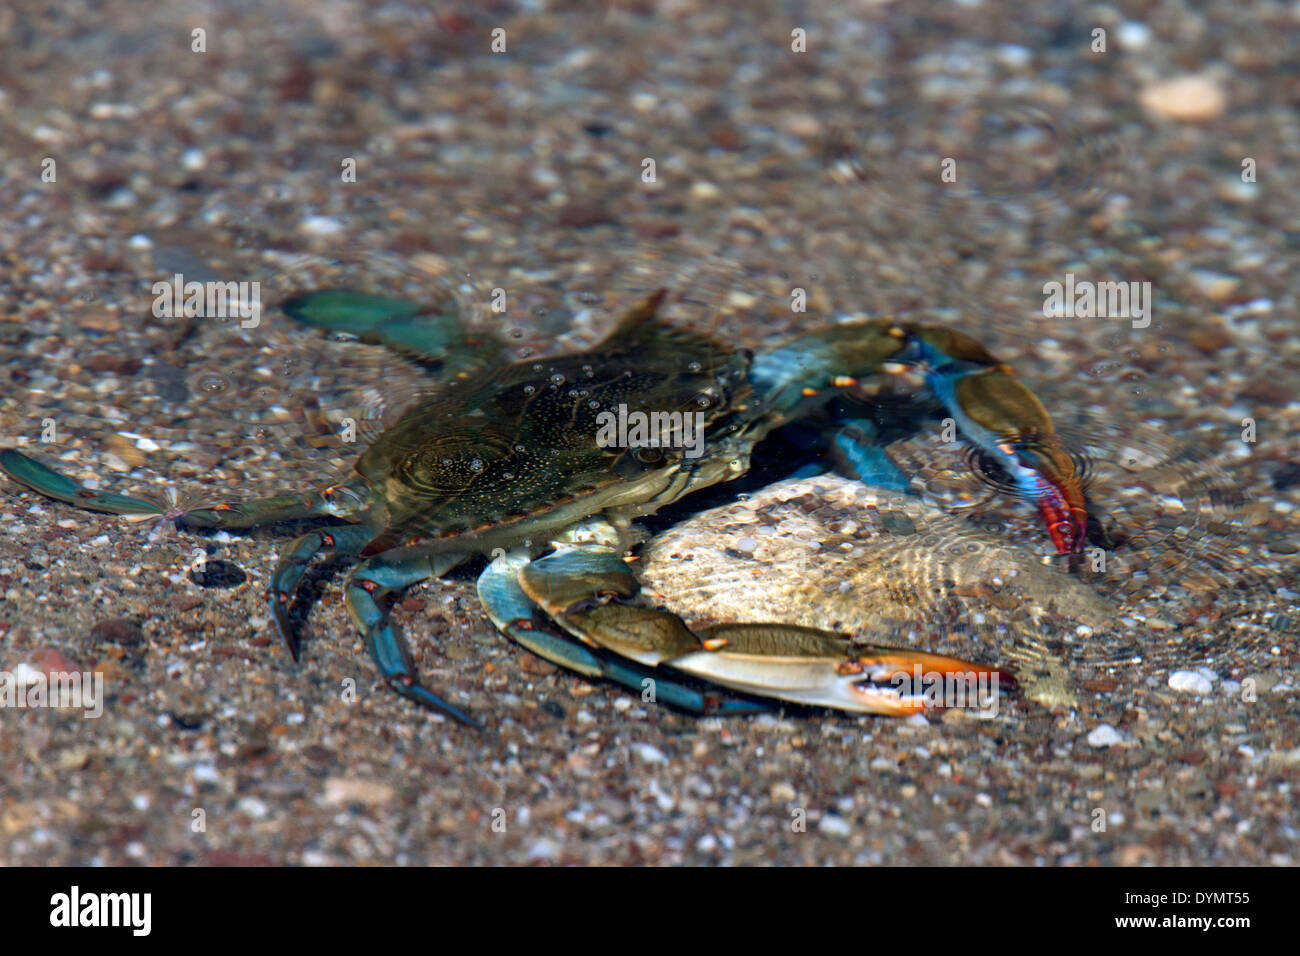 A Blue Crab, an introduced or alien species in the Mediterranean from America, Manavgat, Turkey. Stock Photo